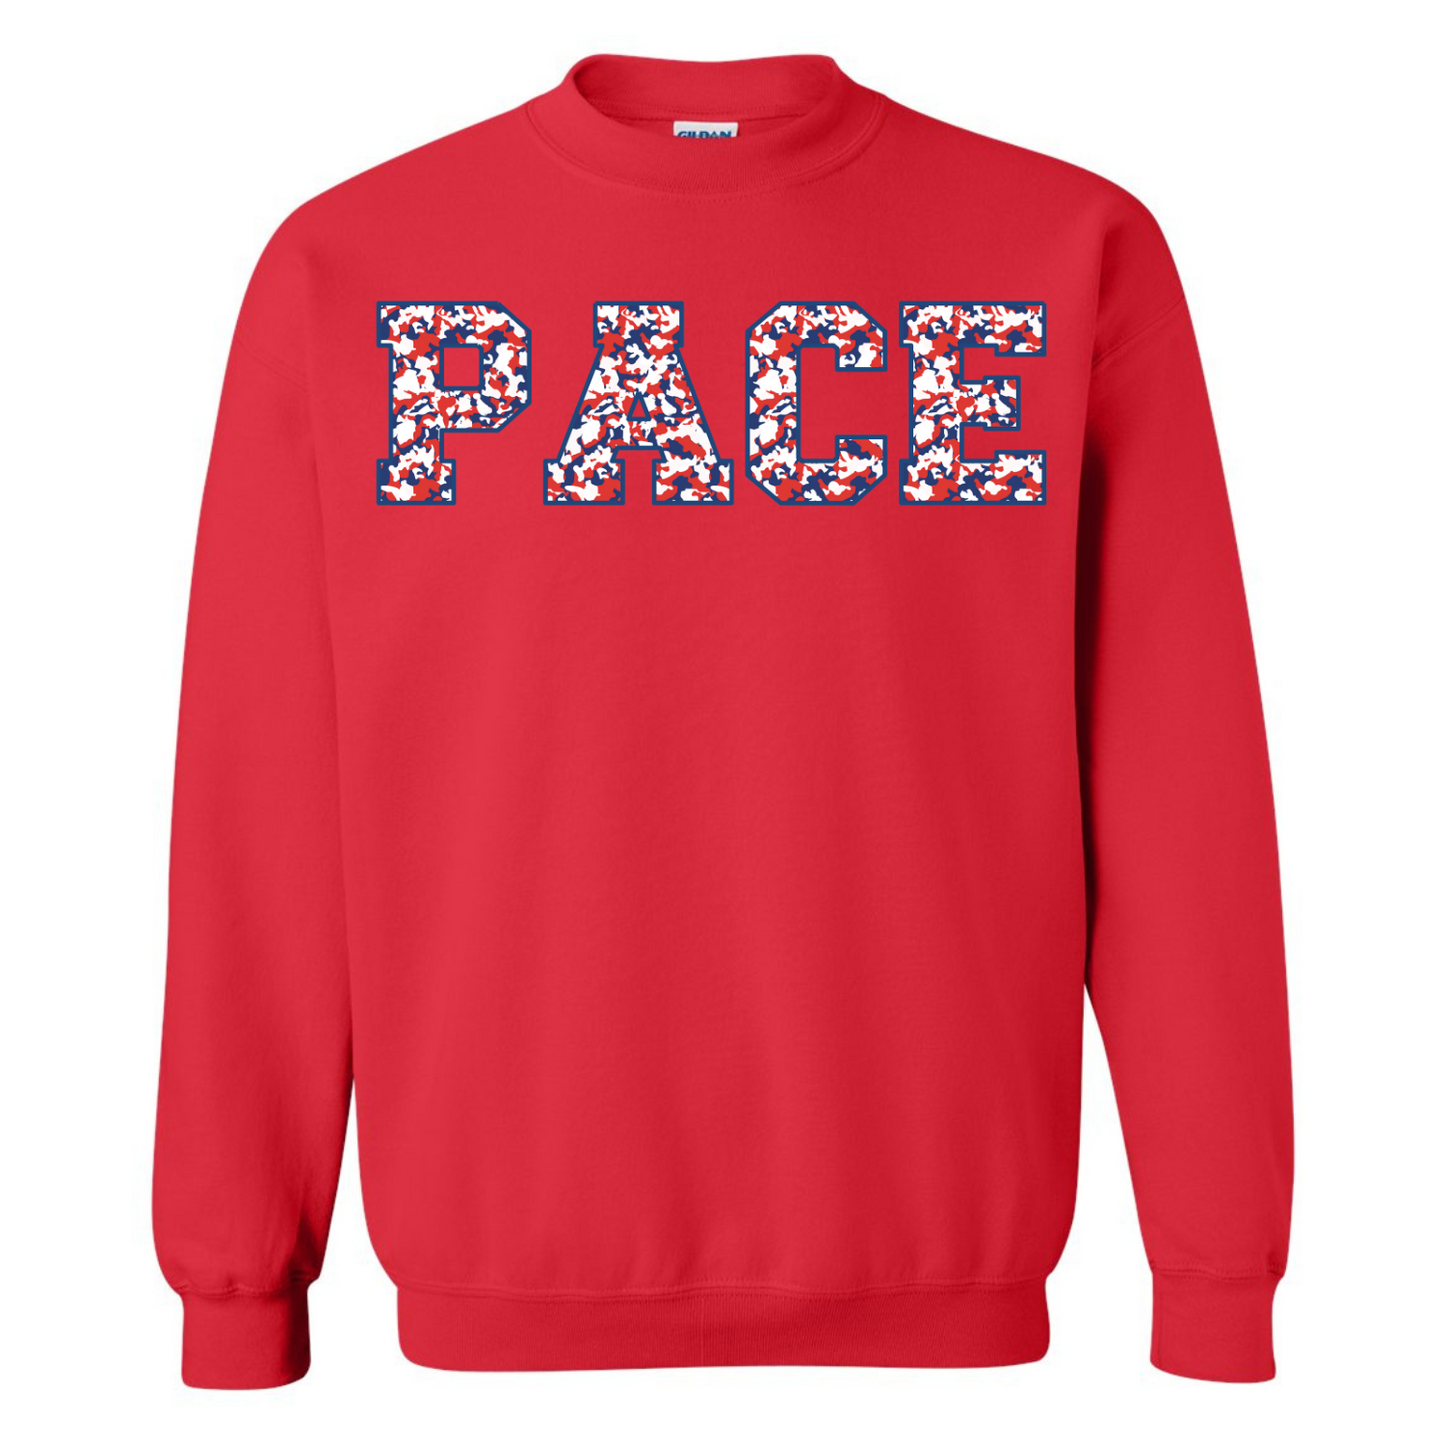 Pace Red + White + Blue Camo Sweatshirt Youth